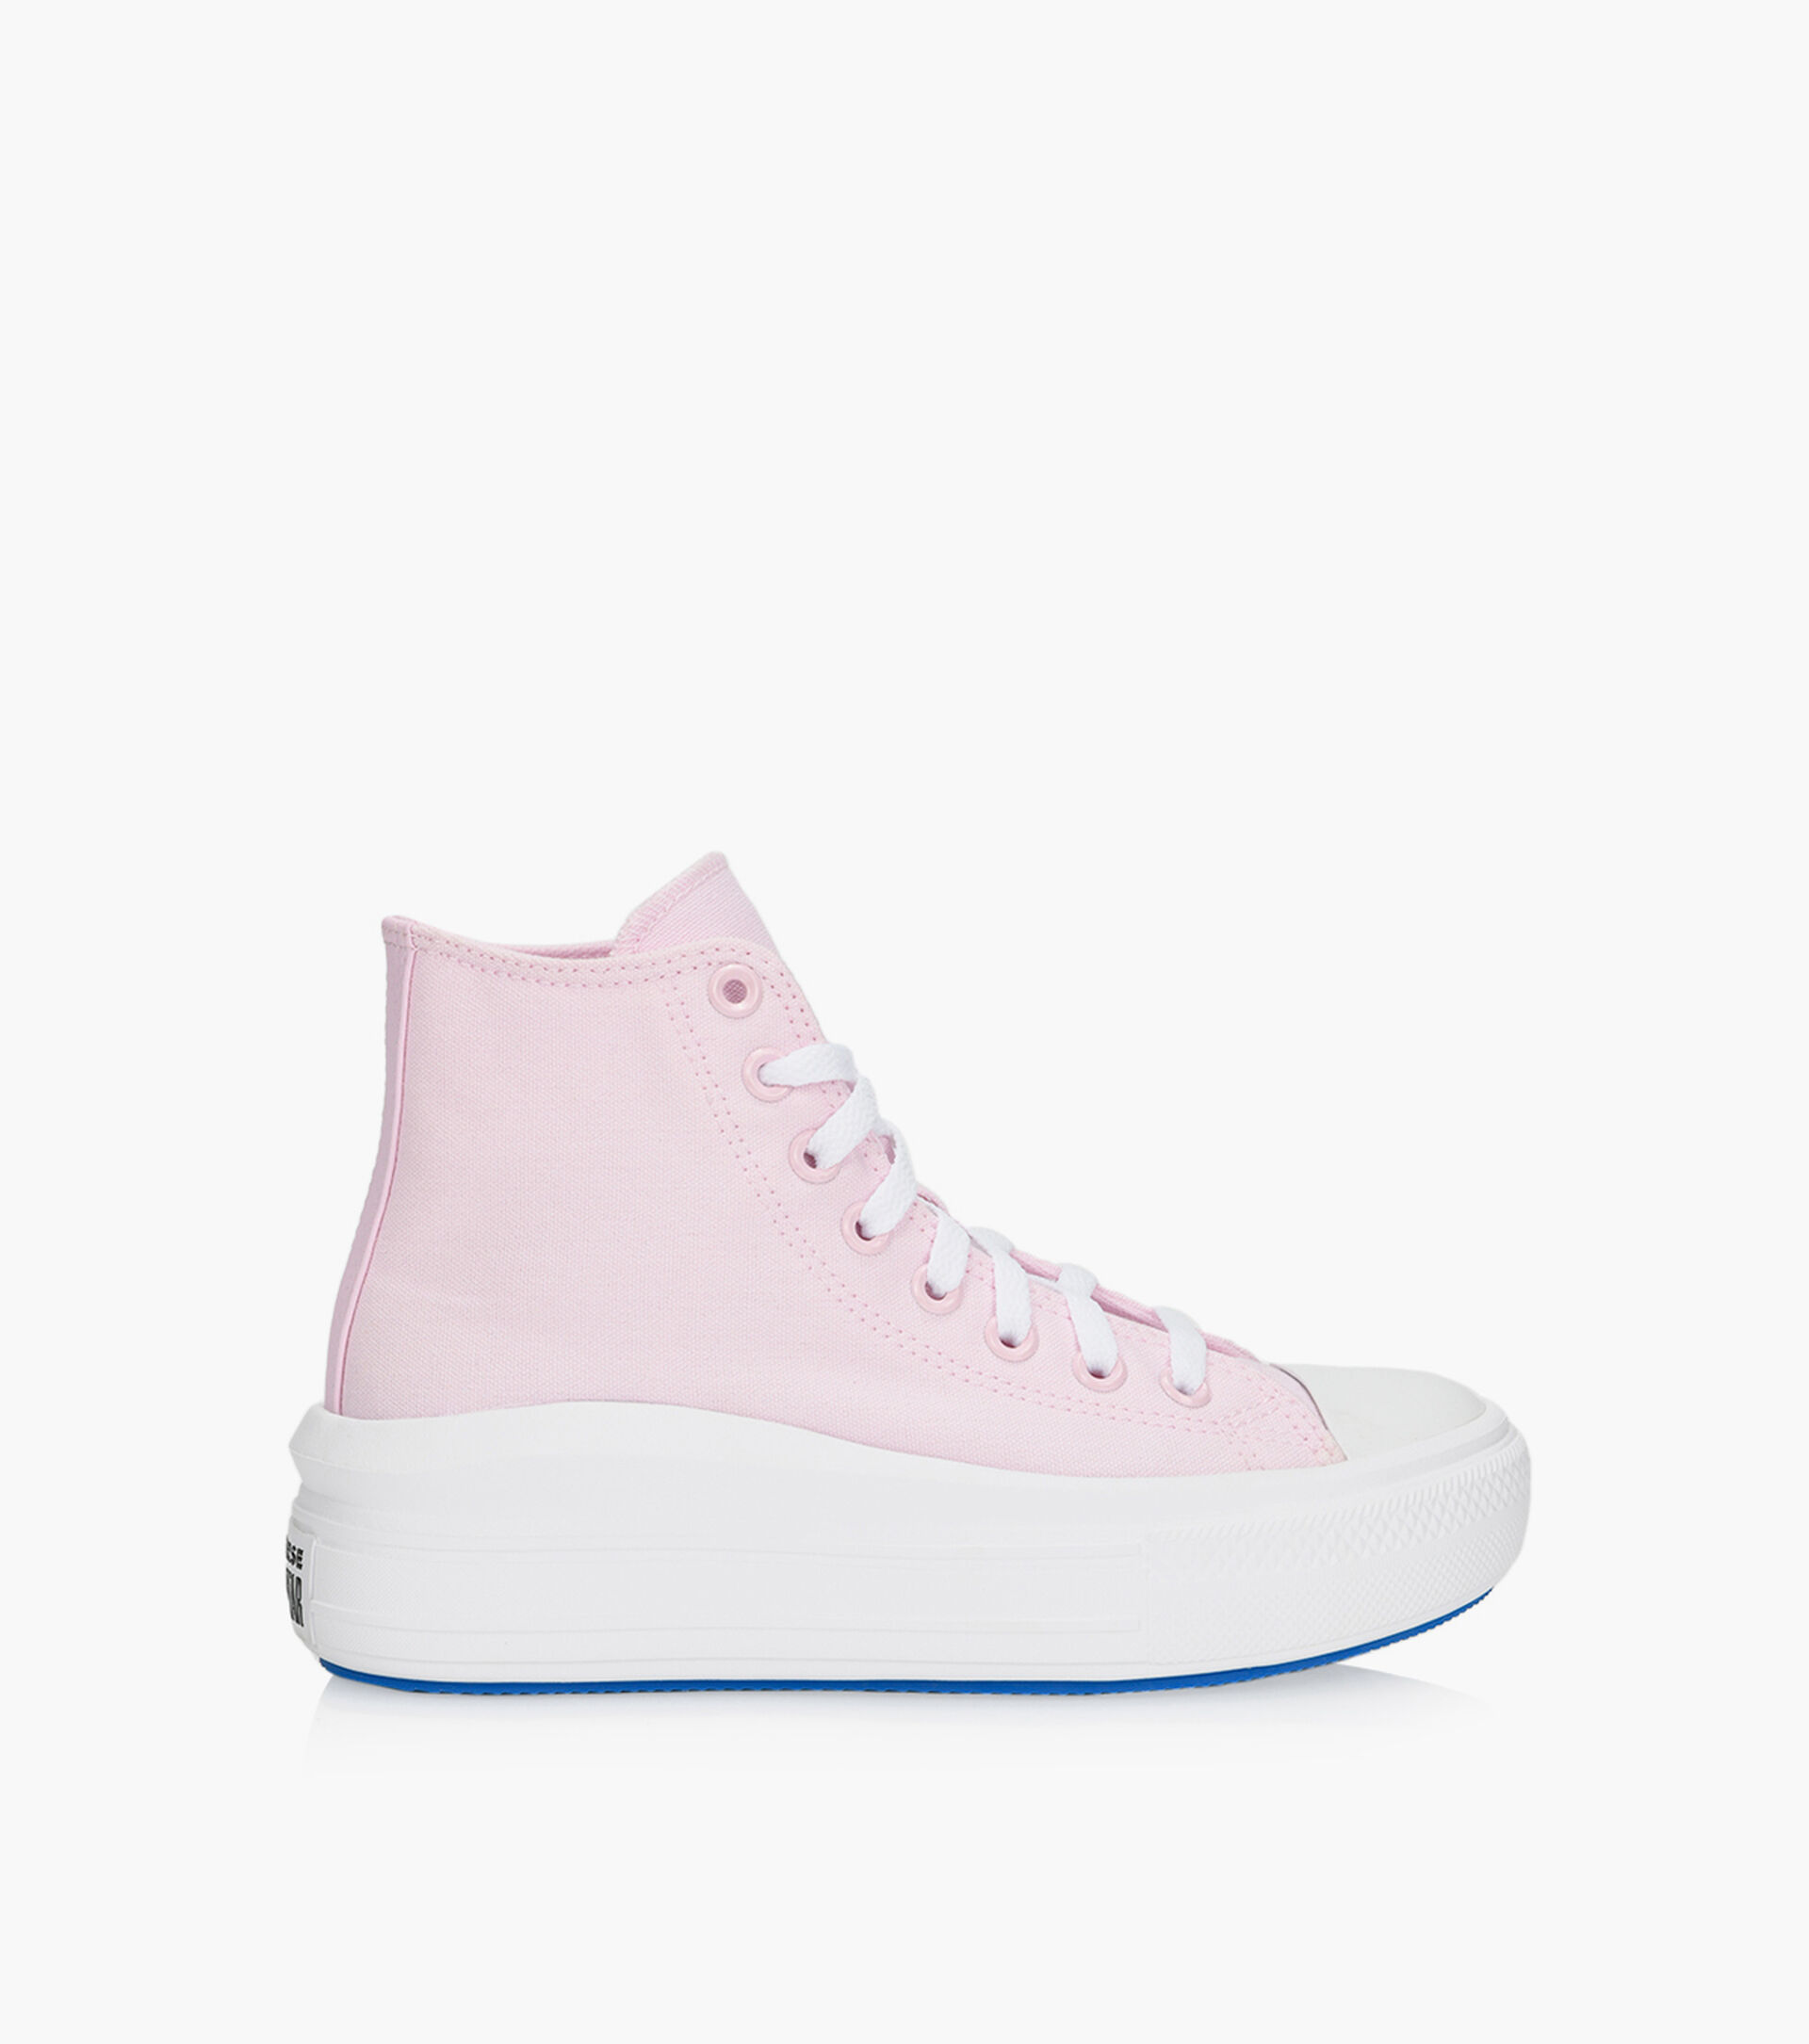 CONVERSE CHUCK TAYLOR ALL STAR MOVE HIGHTOP - Pink Fabric | Browns Shoes